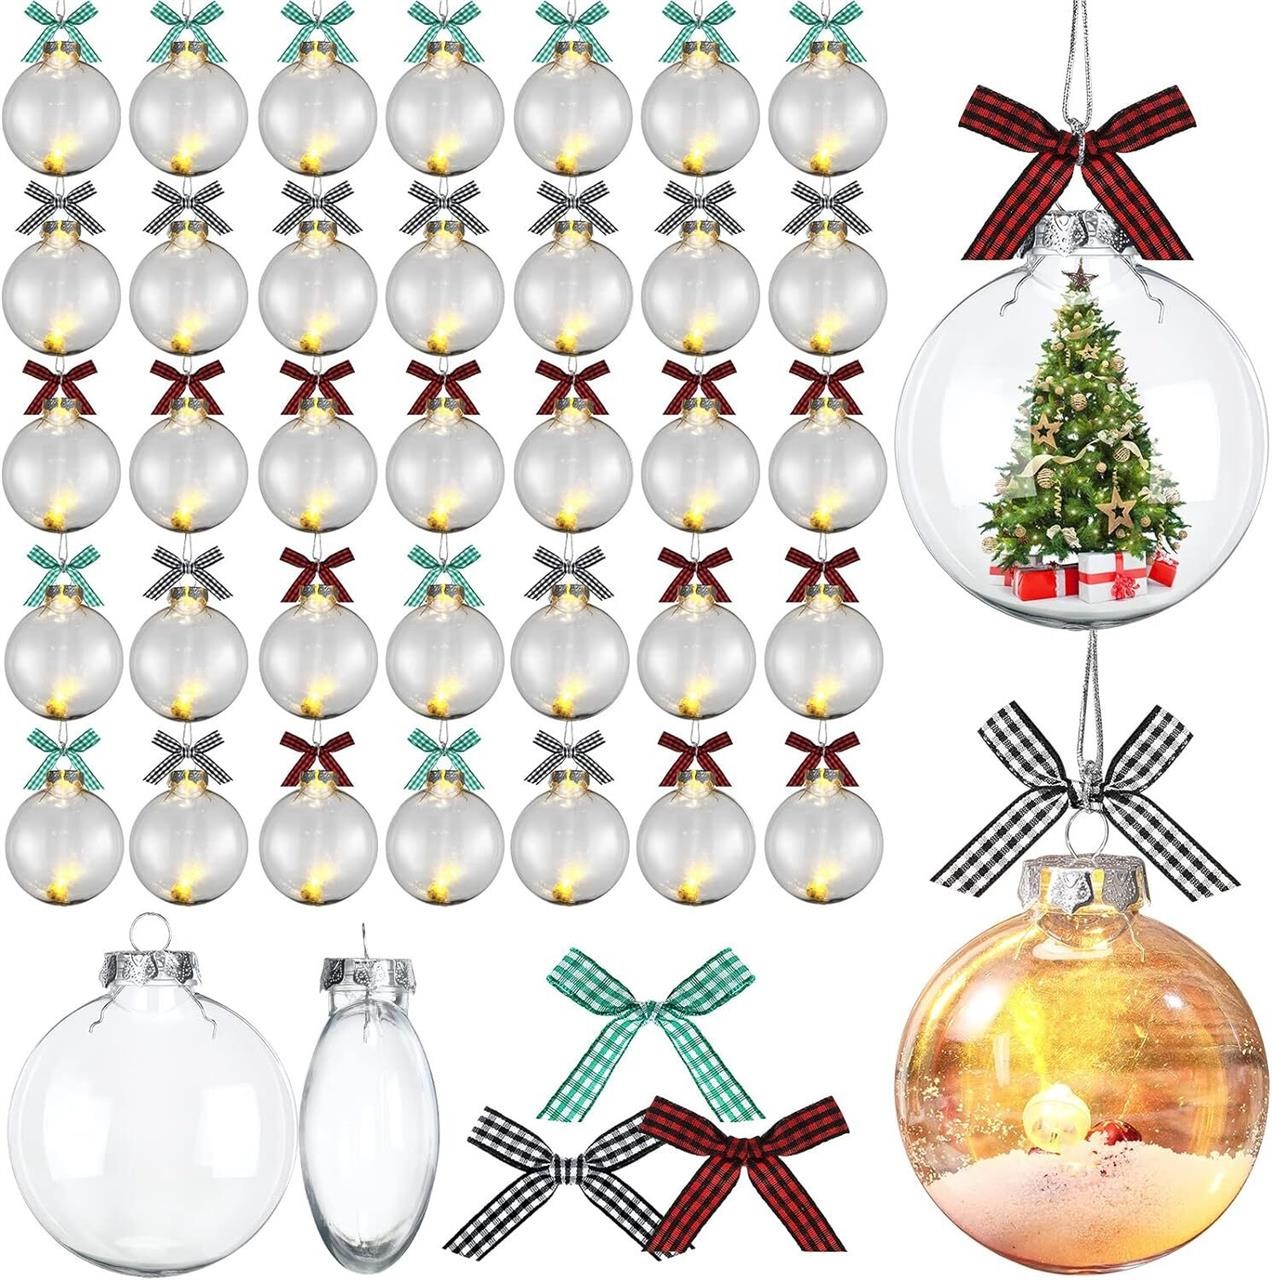 36 Sets Plastic Christmas Ornaments with Lights